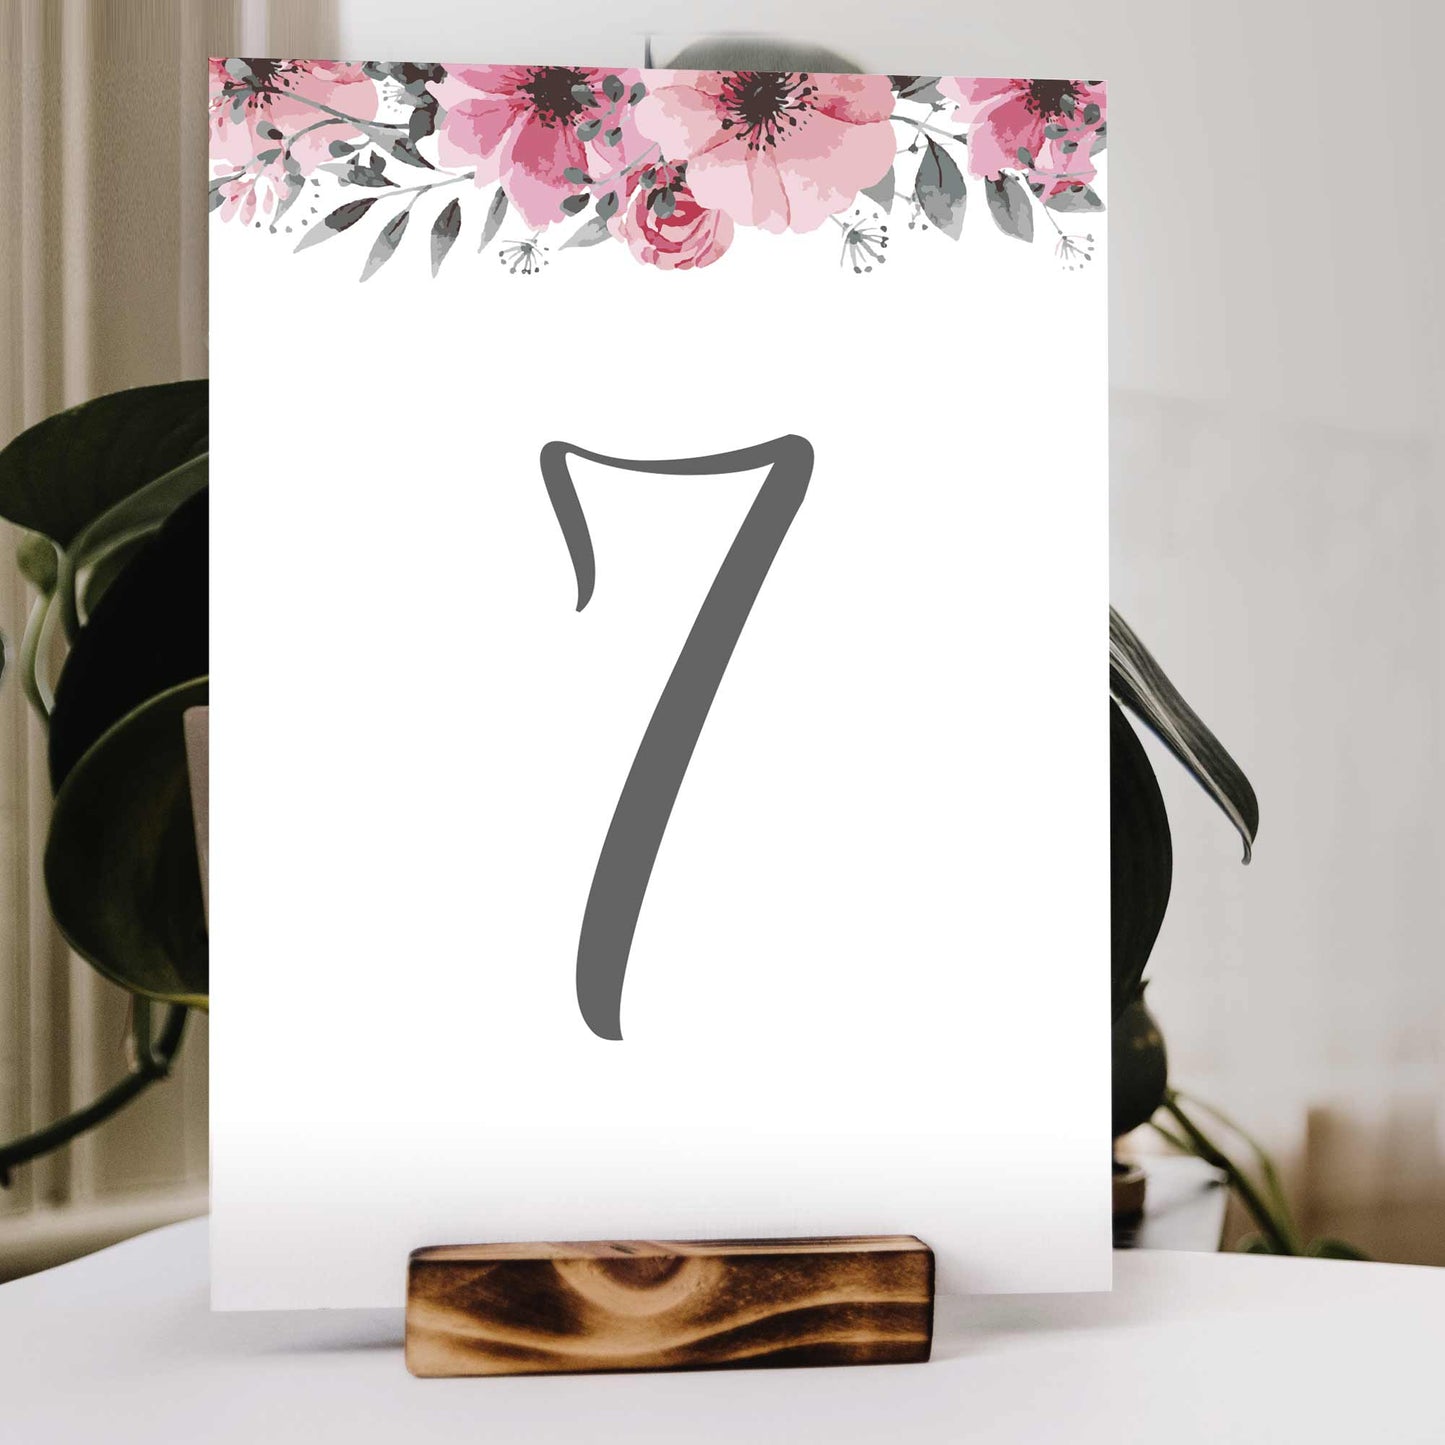 Table number 7 with pink flowers on a wedding table